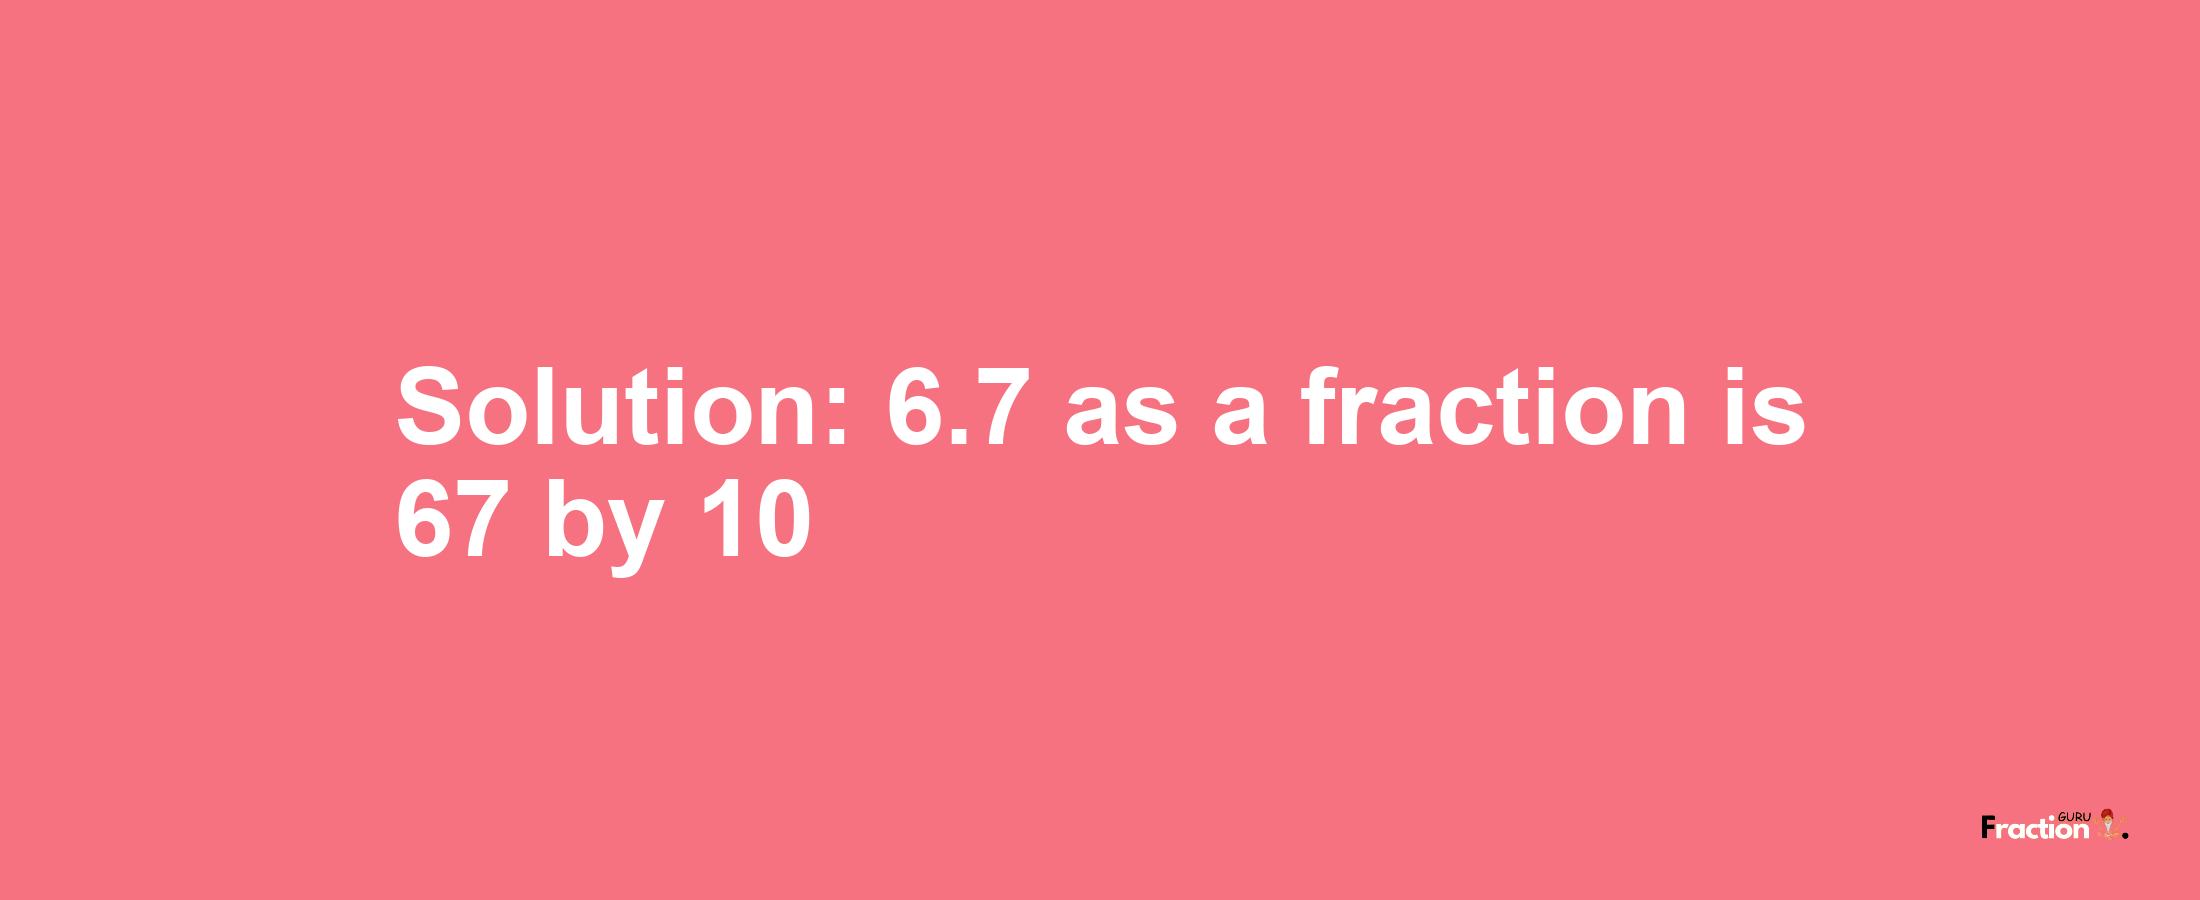 Solution:6.7 as a fraction is 67/10